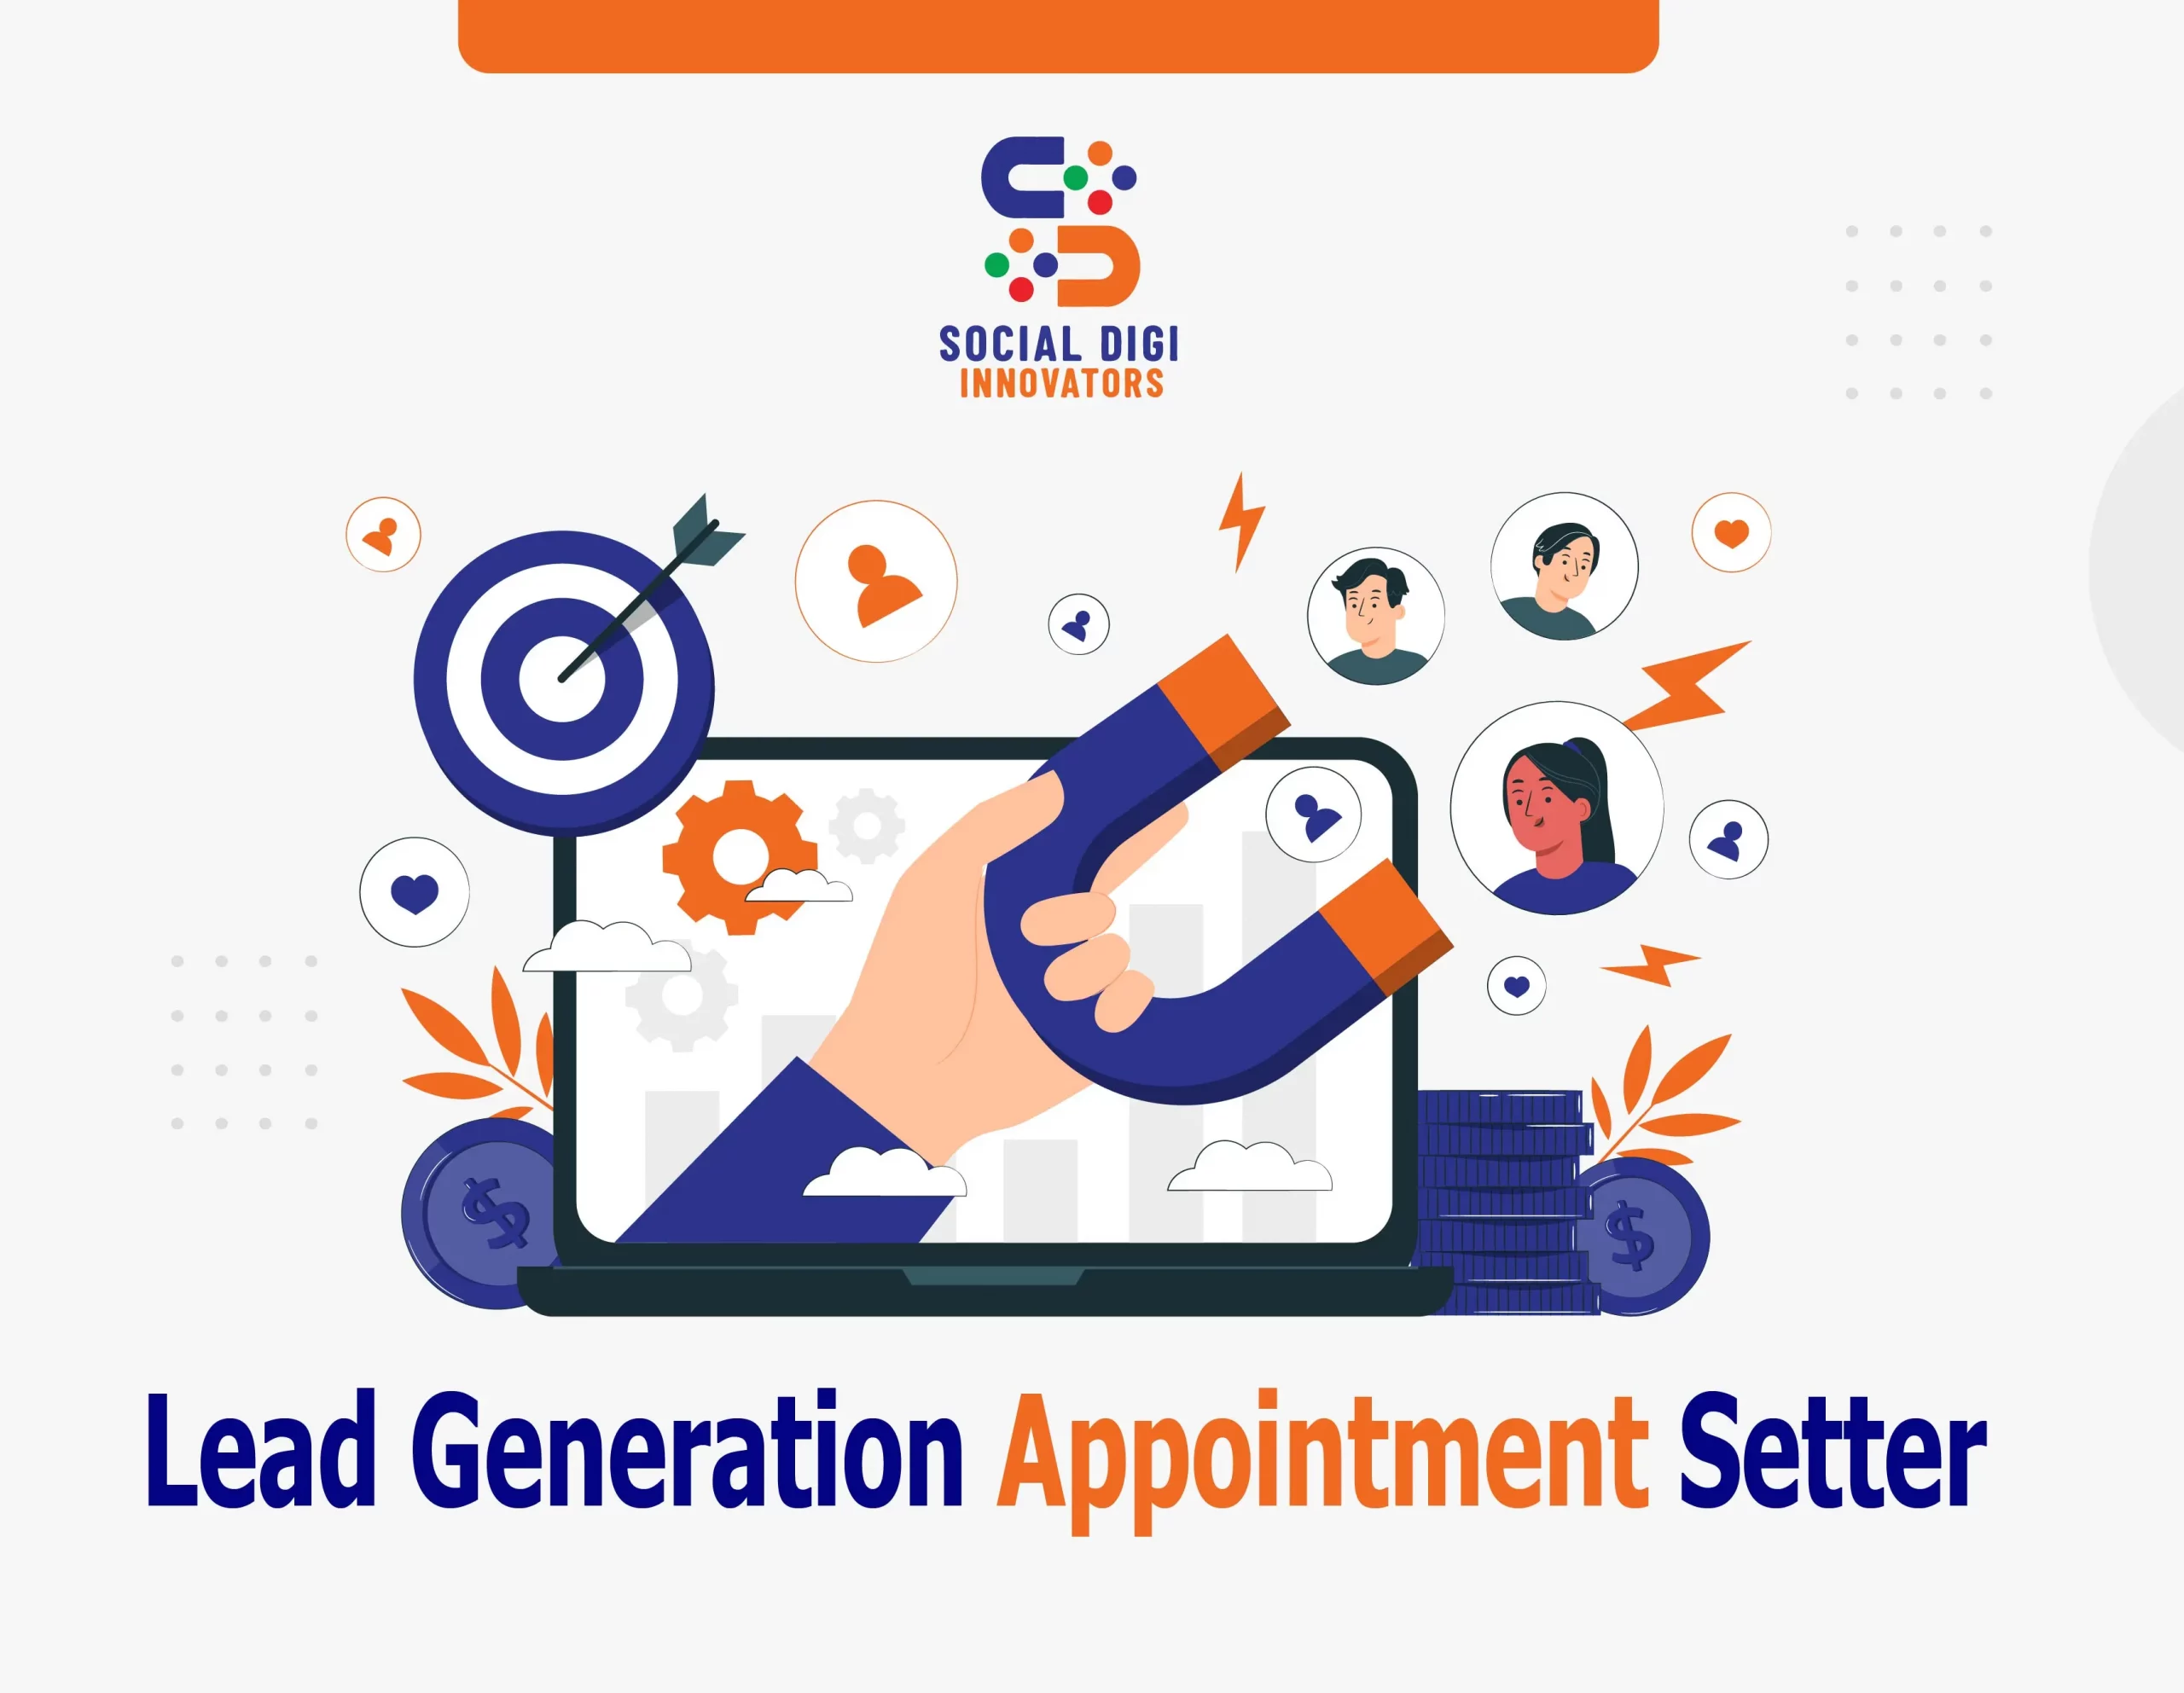 Lead Generation Appointment Setter